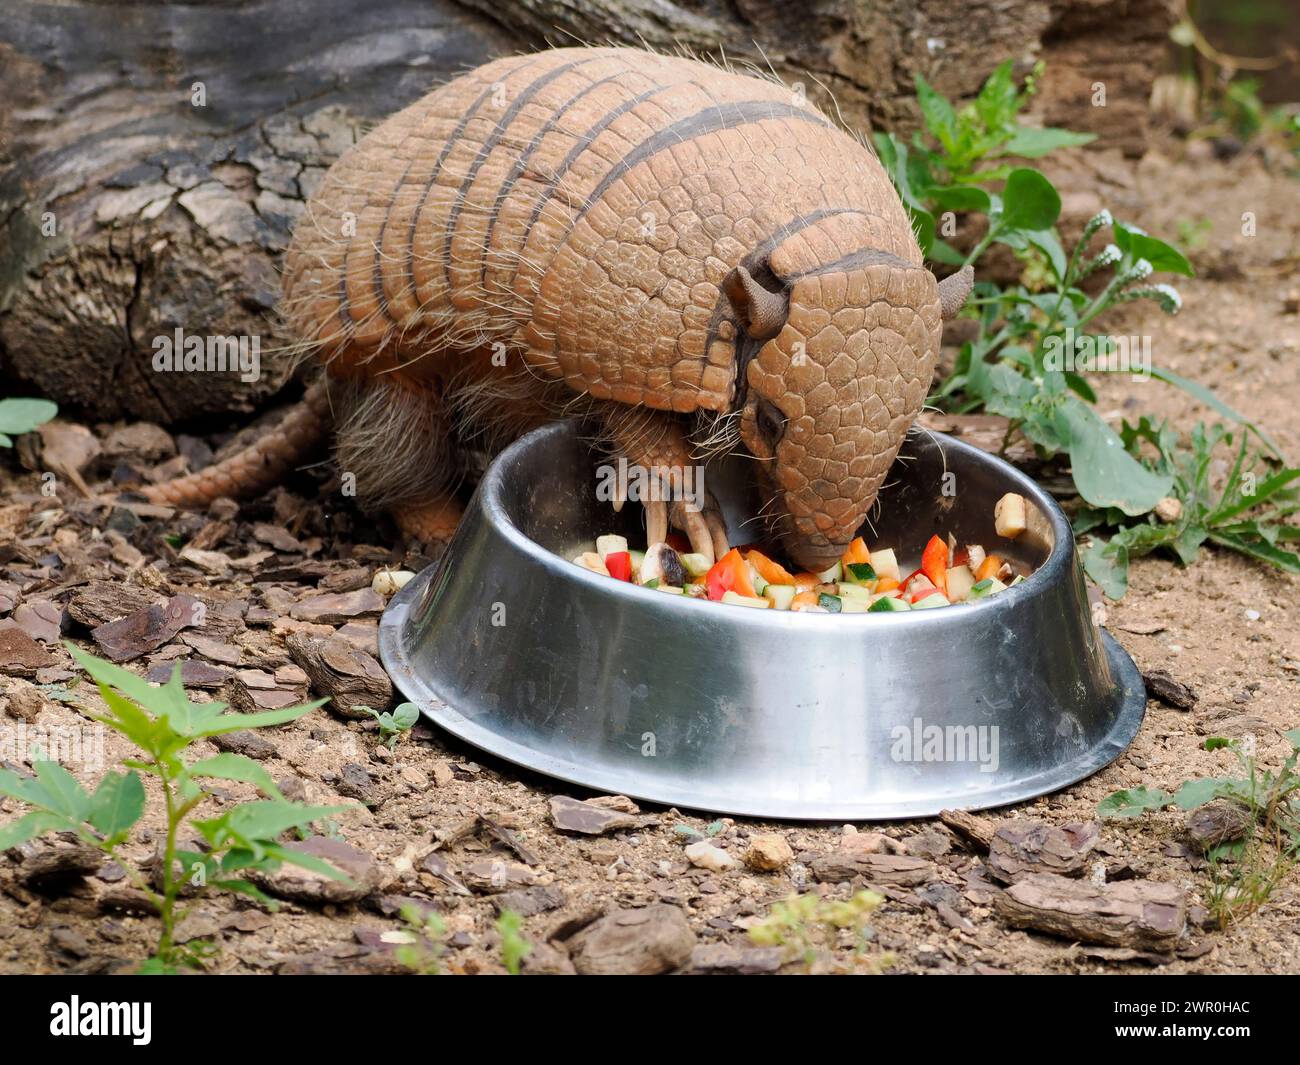 Six-banded armadillo (Euphractus sexcinctus) eating in a bowl of fruits and vegetables Stock Photo